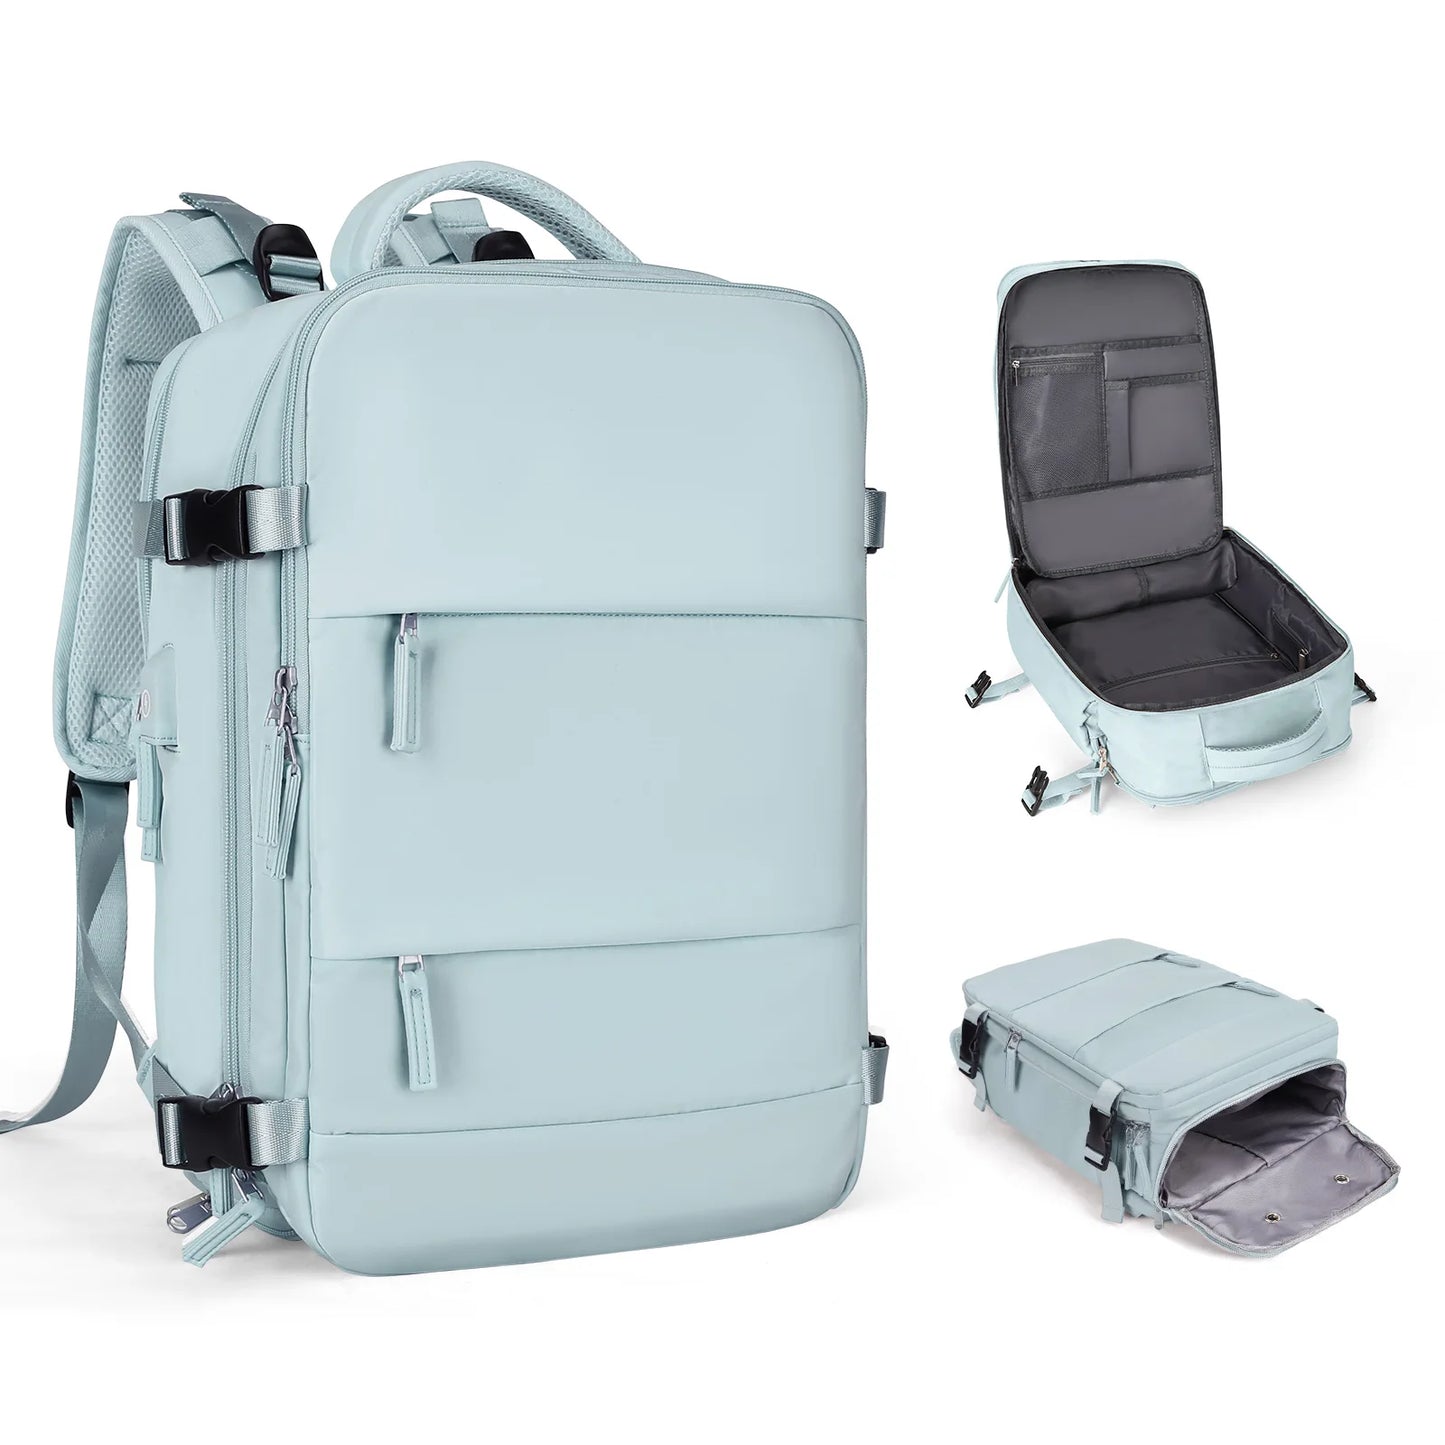 Ice Blue travel backpack personal item with wet dry pocket laptop sleeve usb charger and shoe sleeve